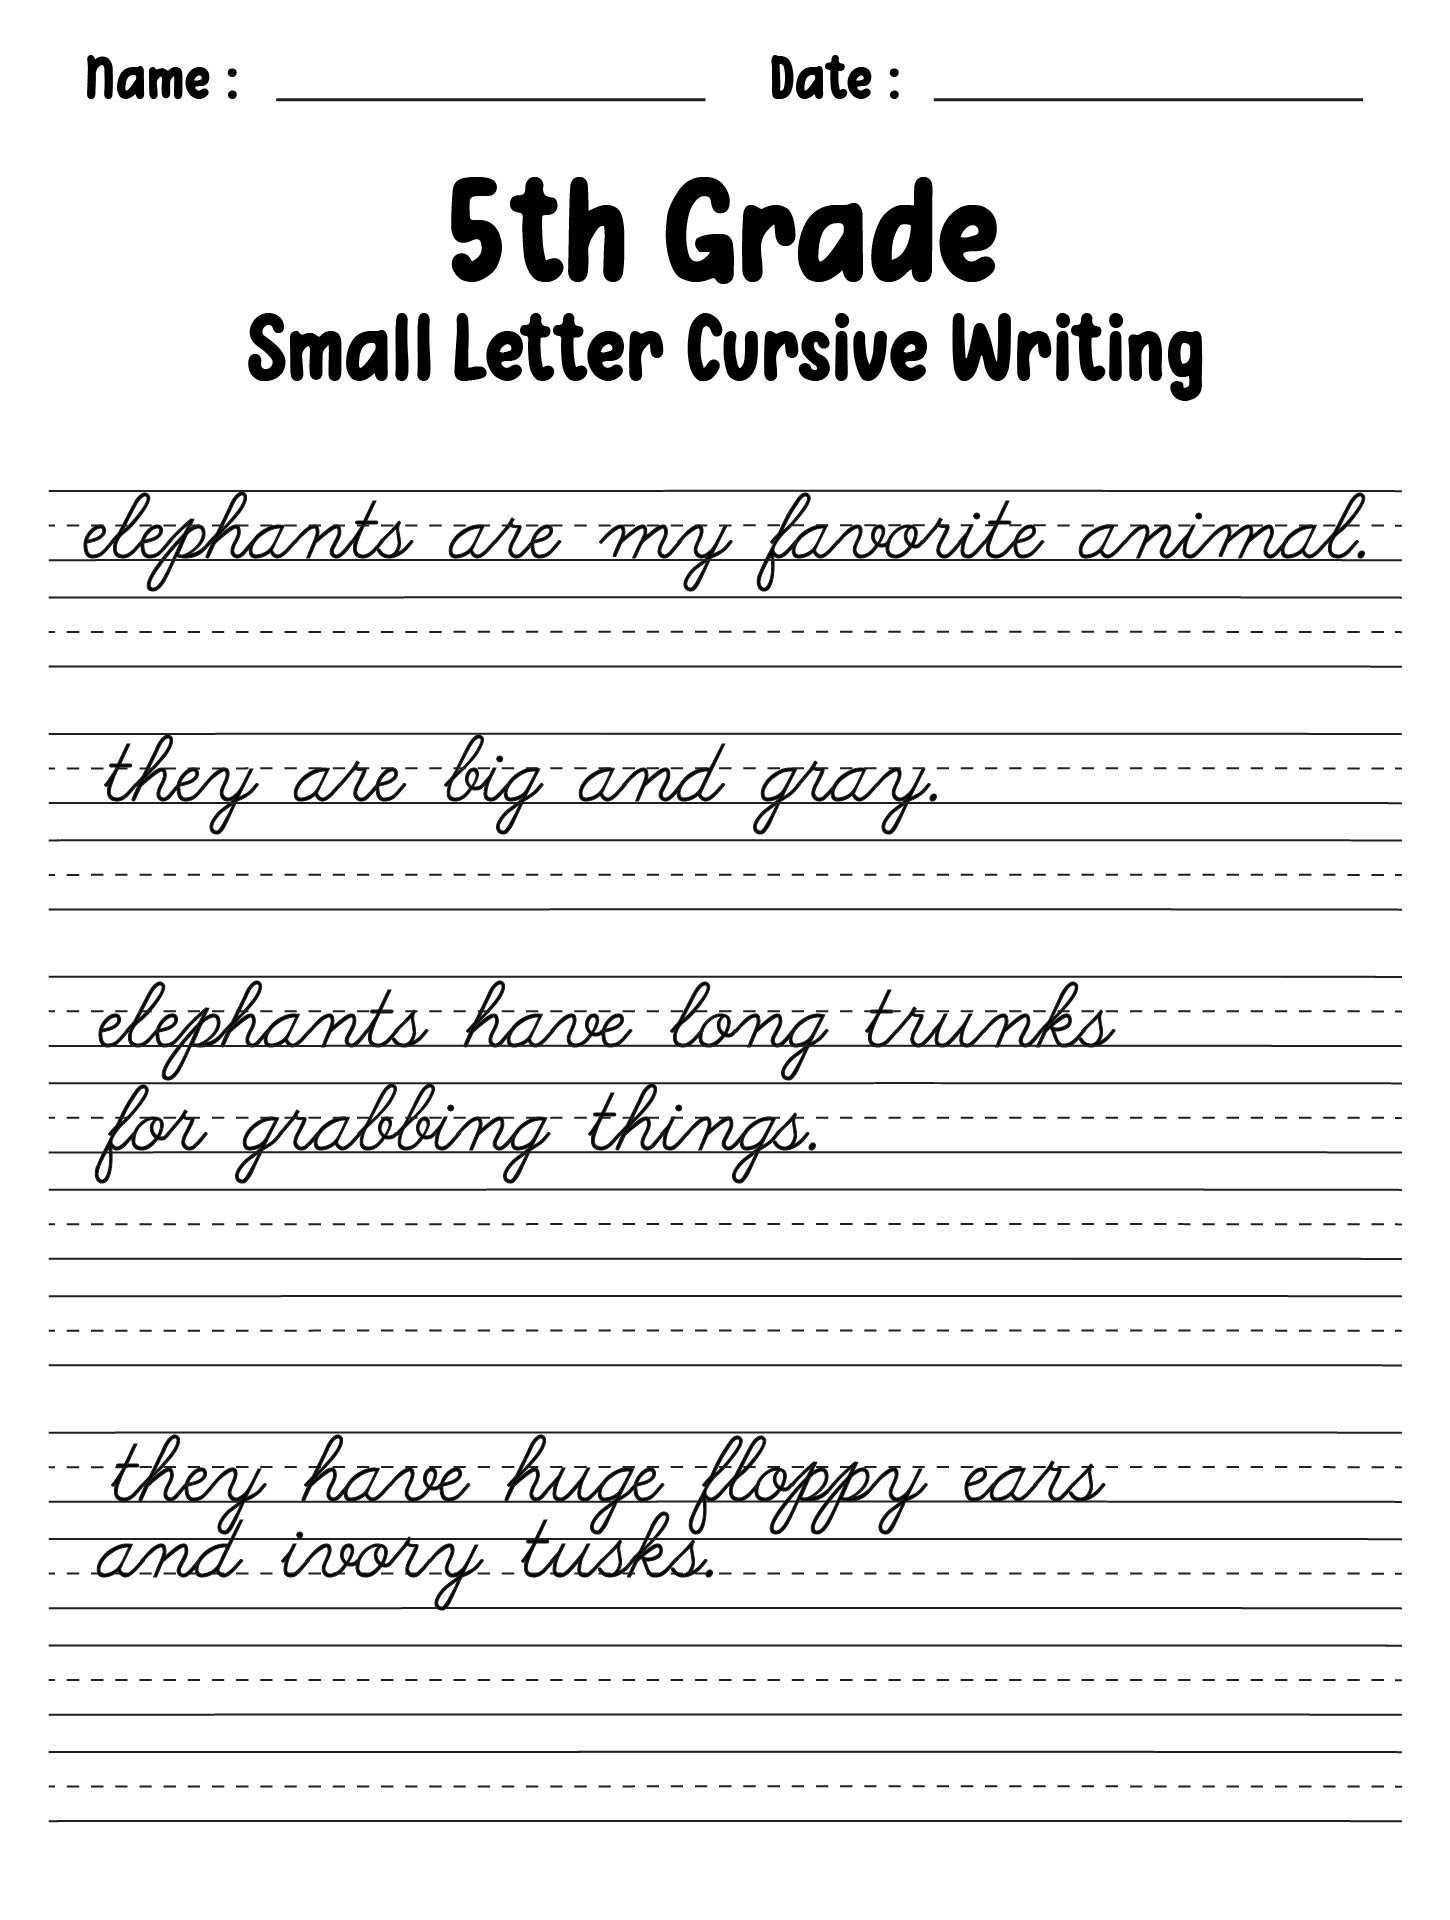 Small Letter Cursive Writing Printable Worksheets 5th Grade